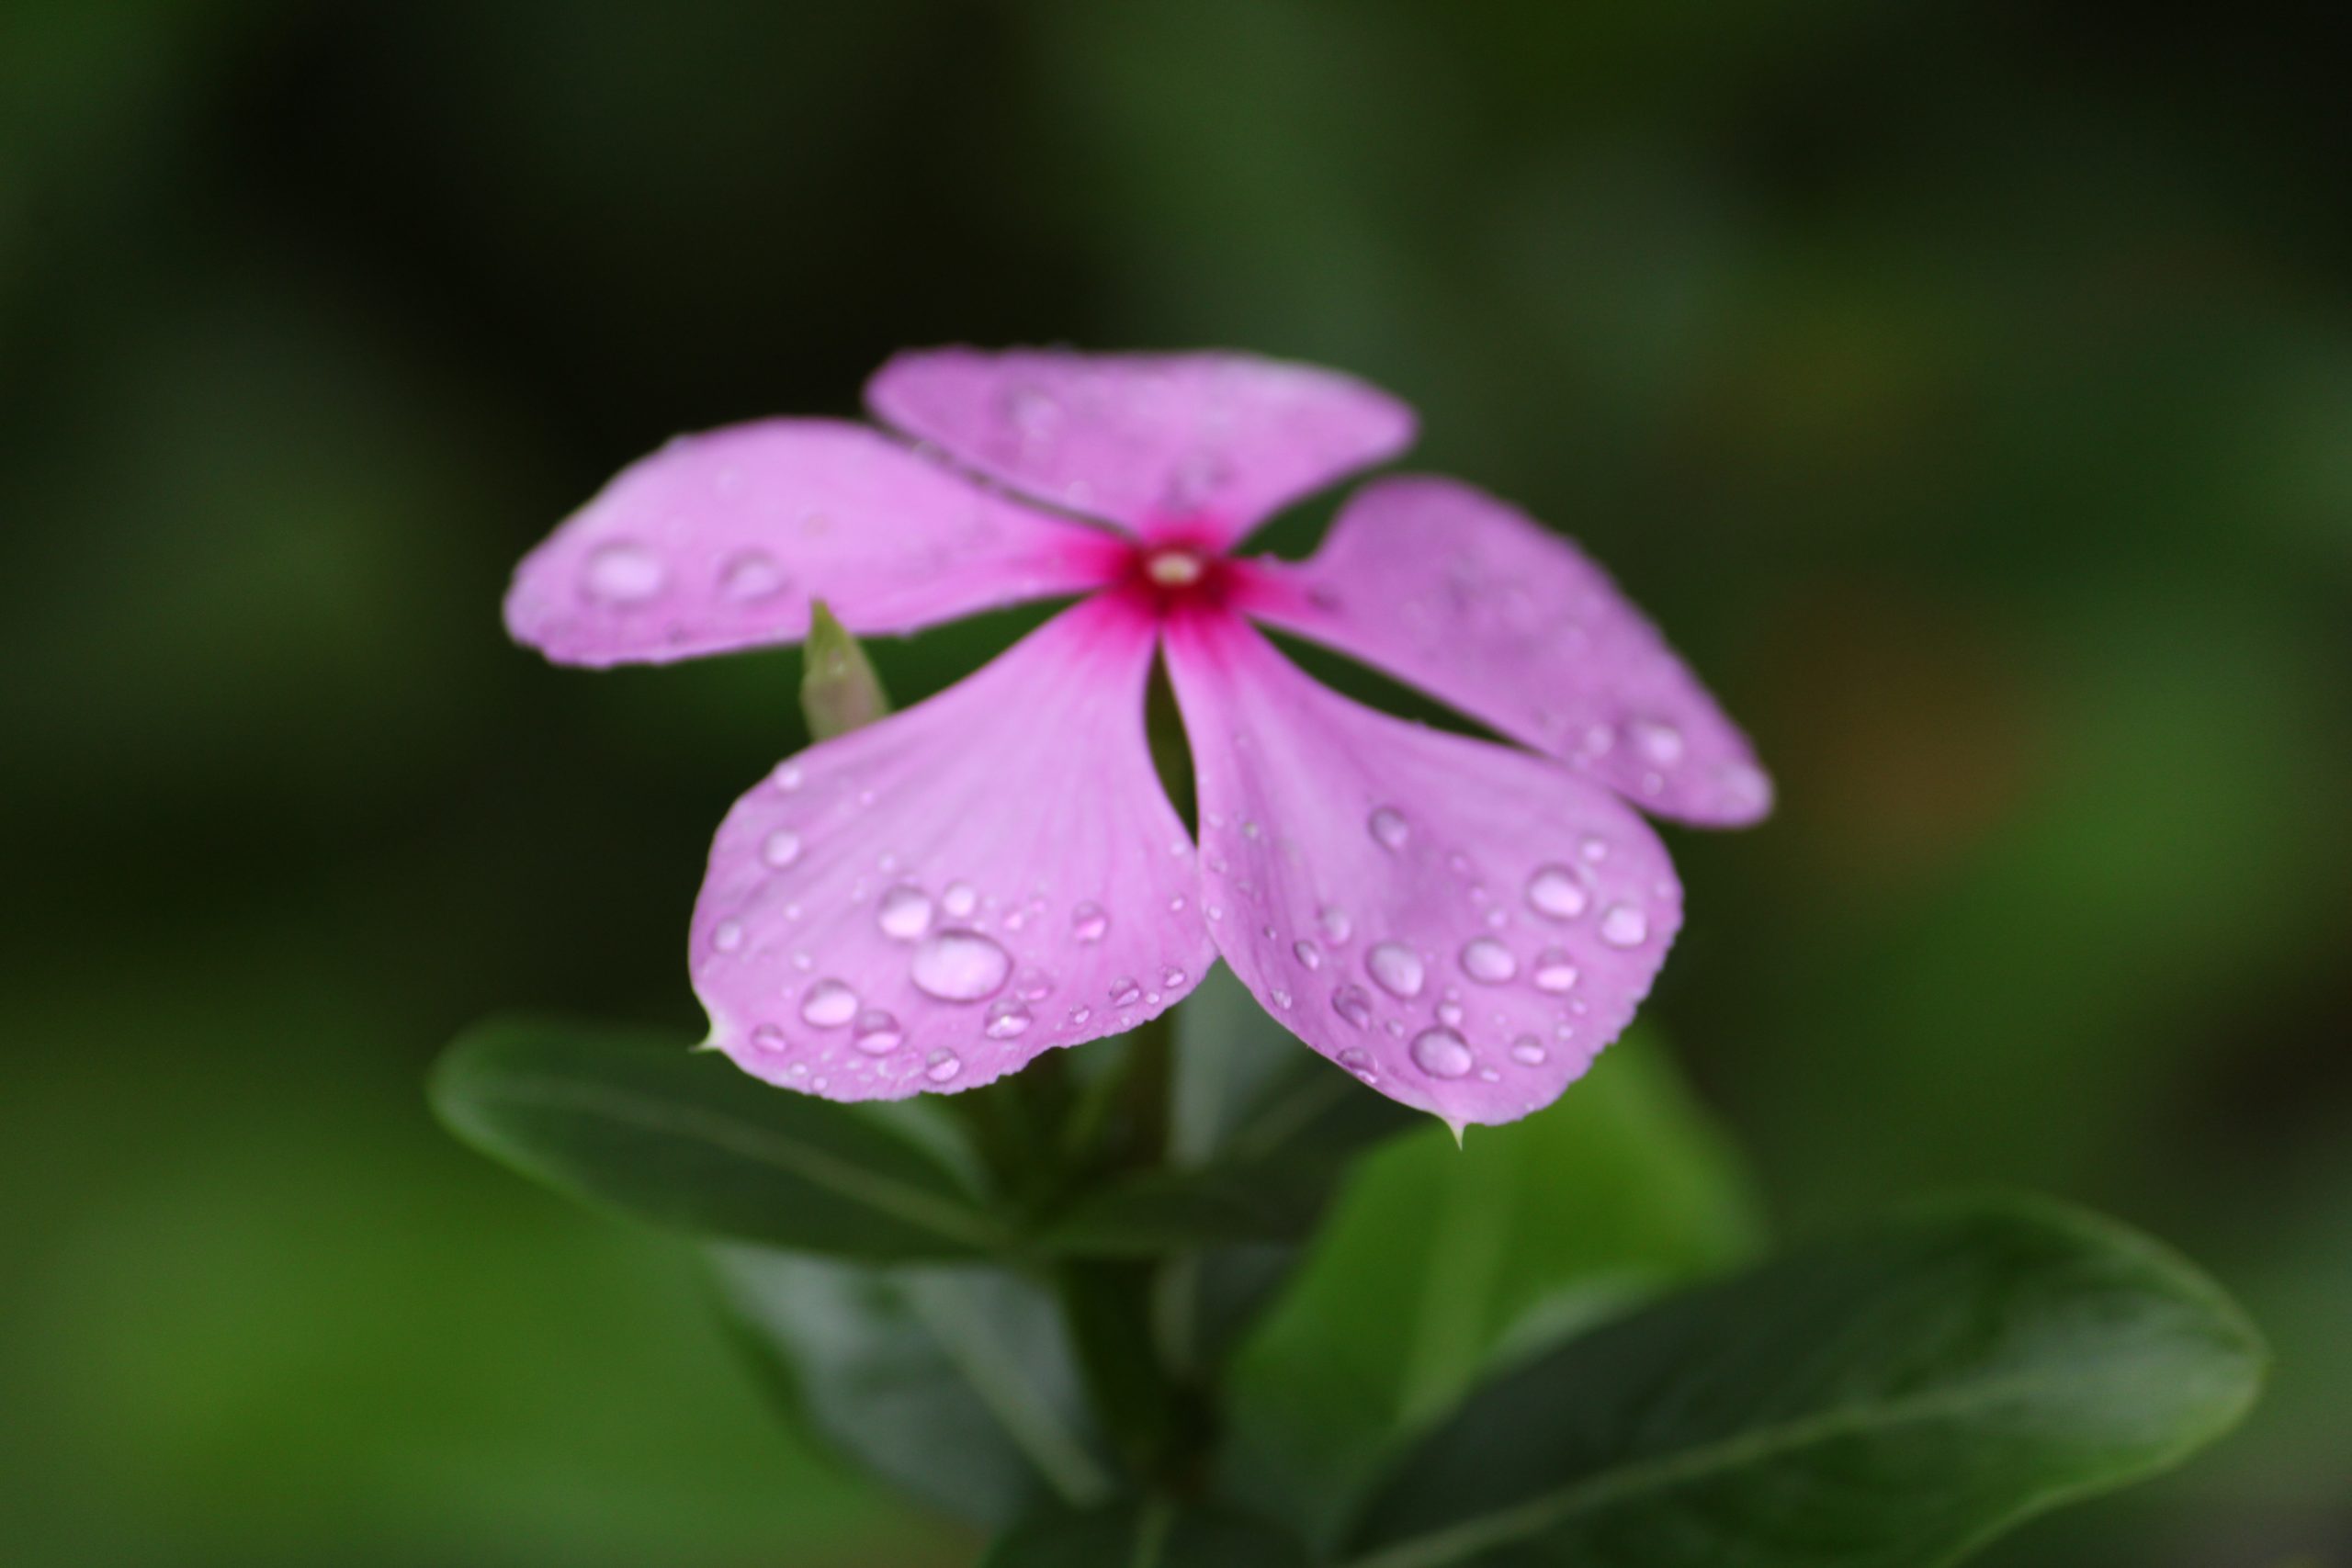 Water drops on a flower.